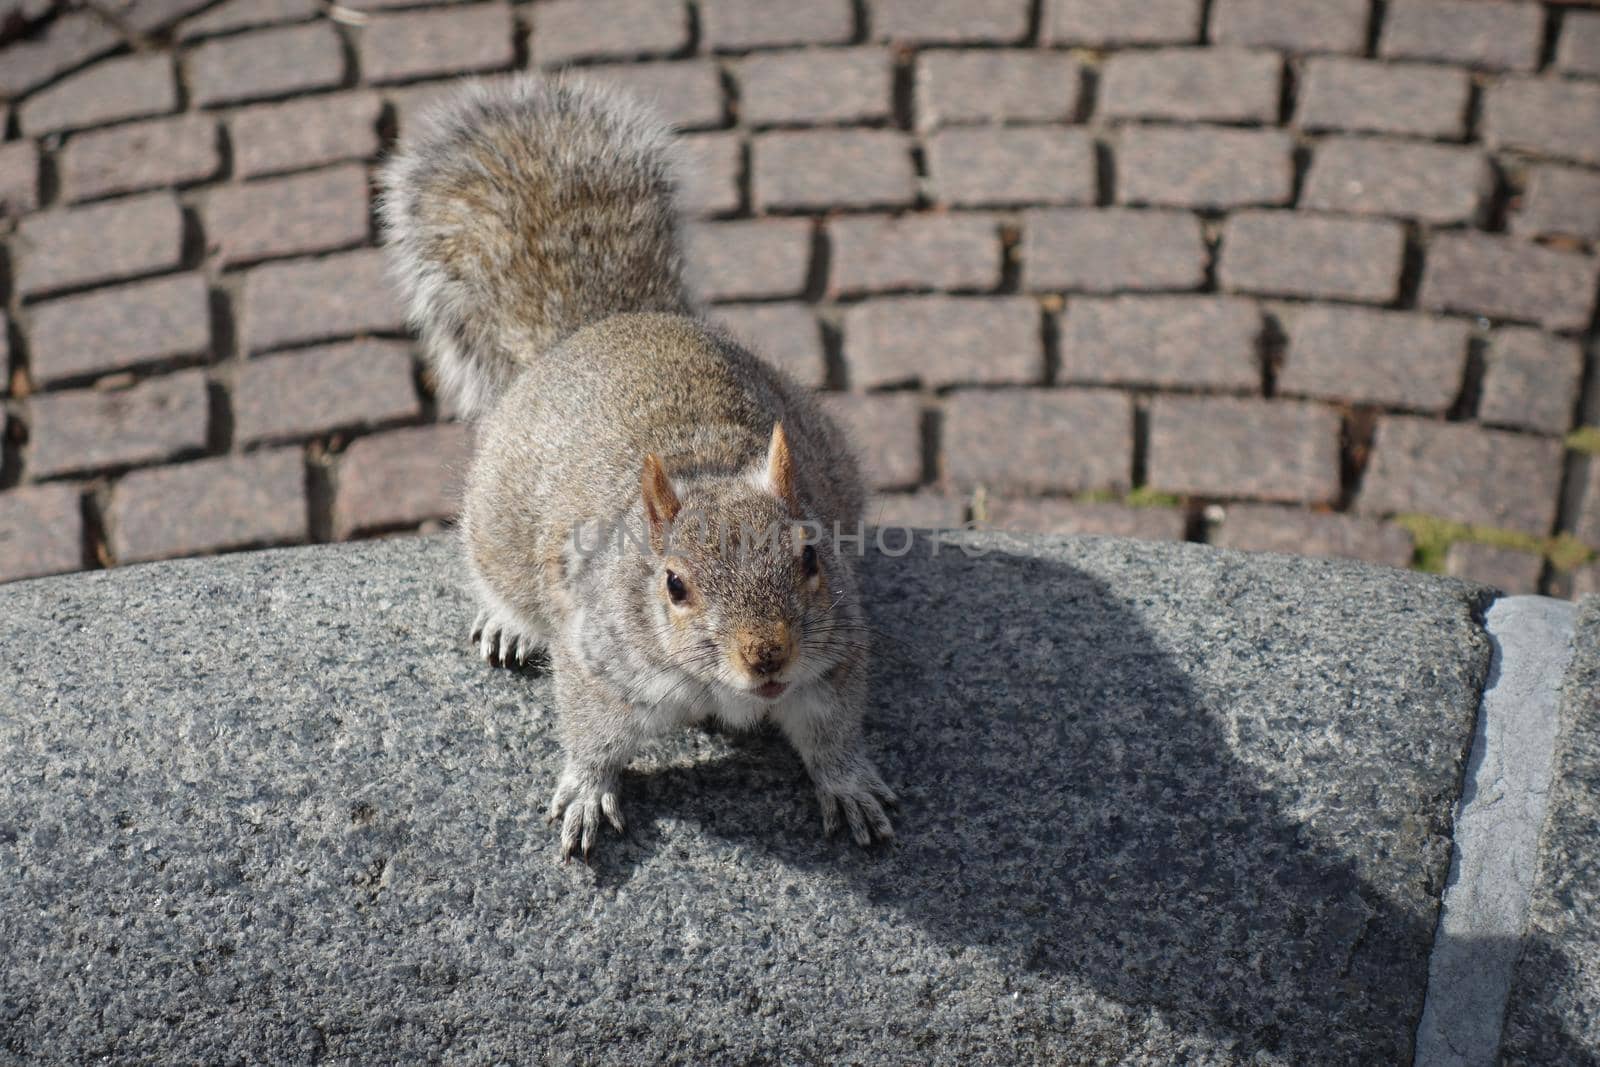 Grey squirrel from above on the paving in a park by Luise123